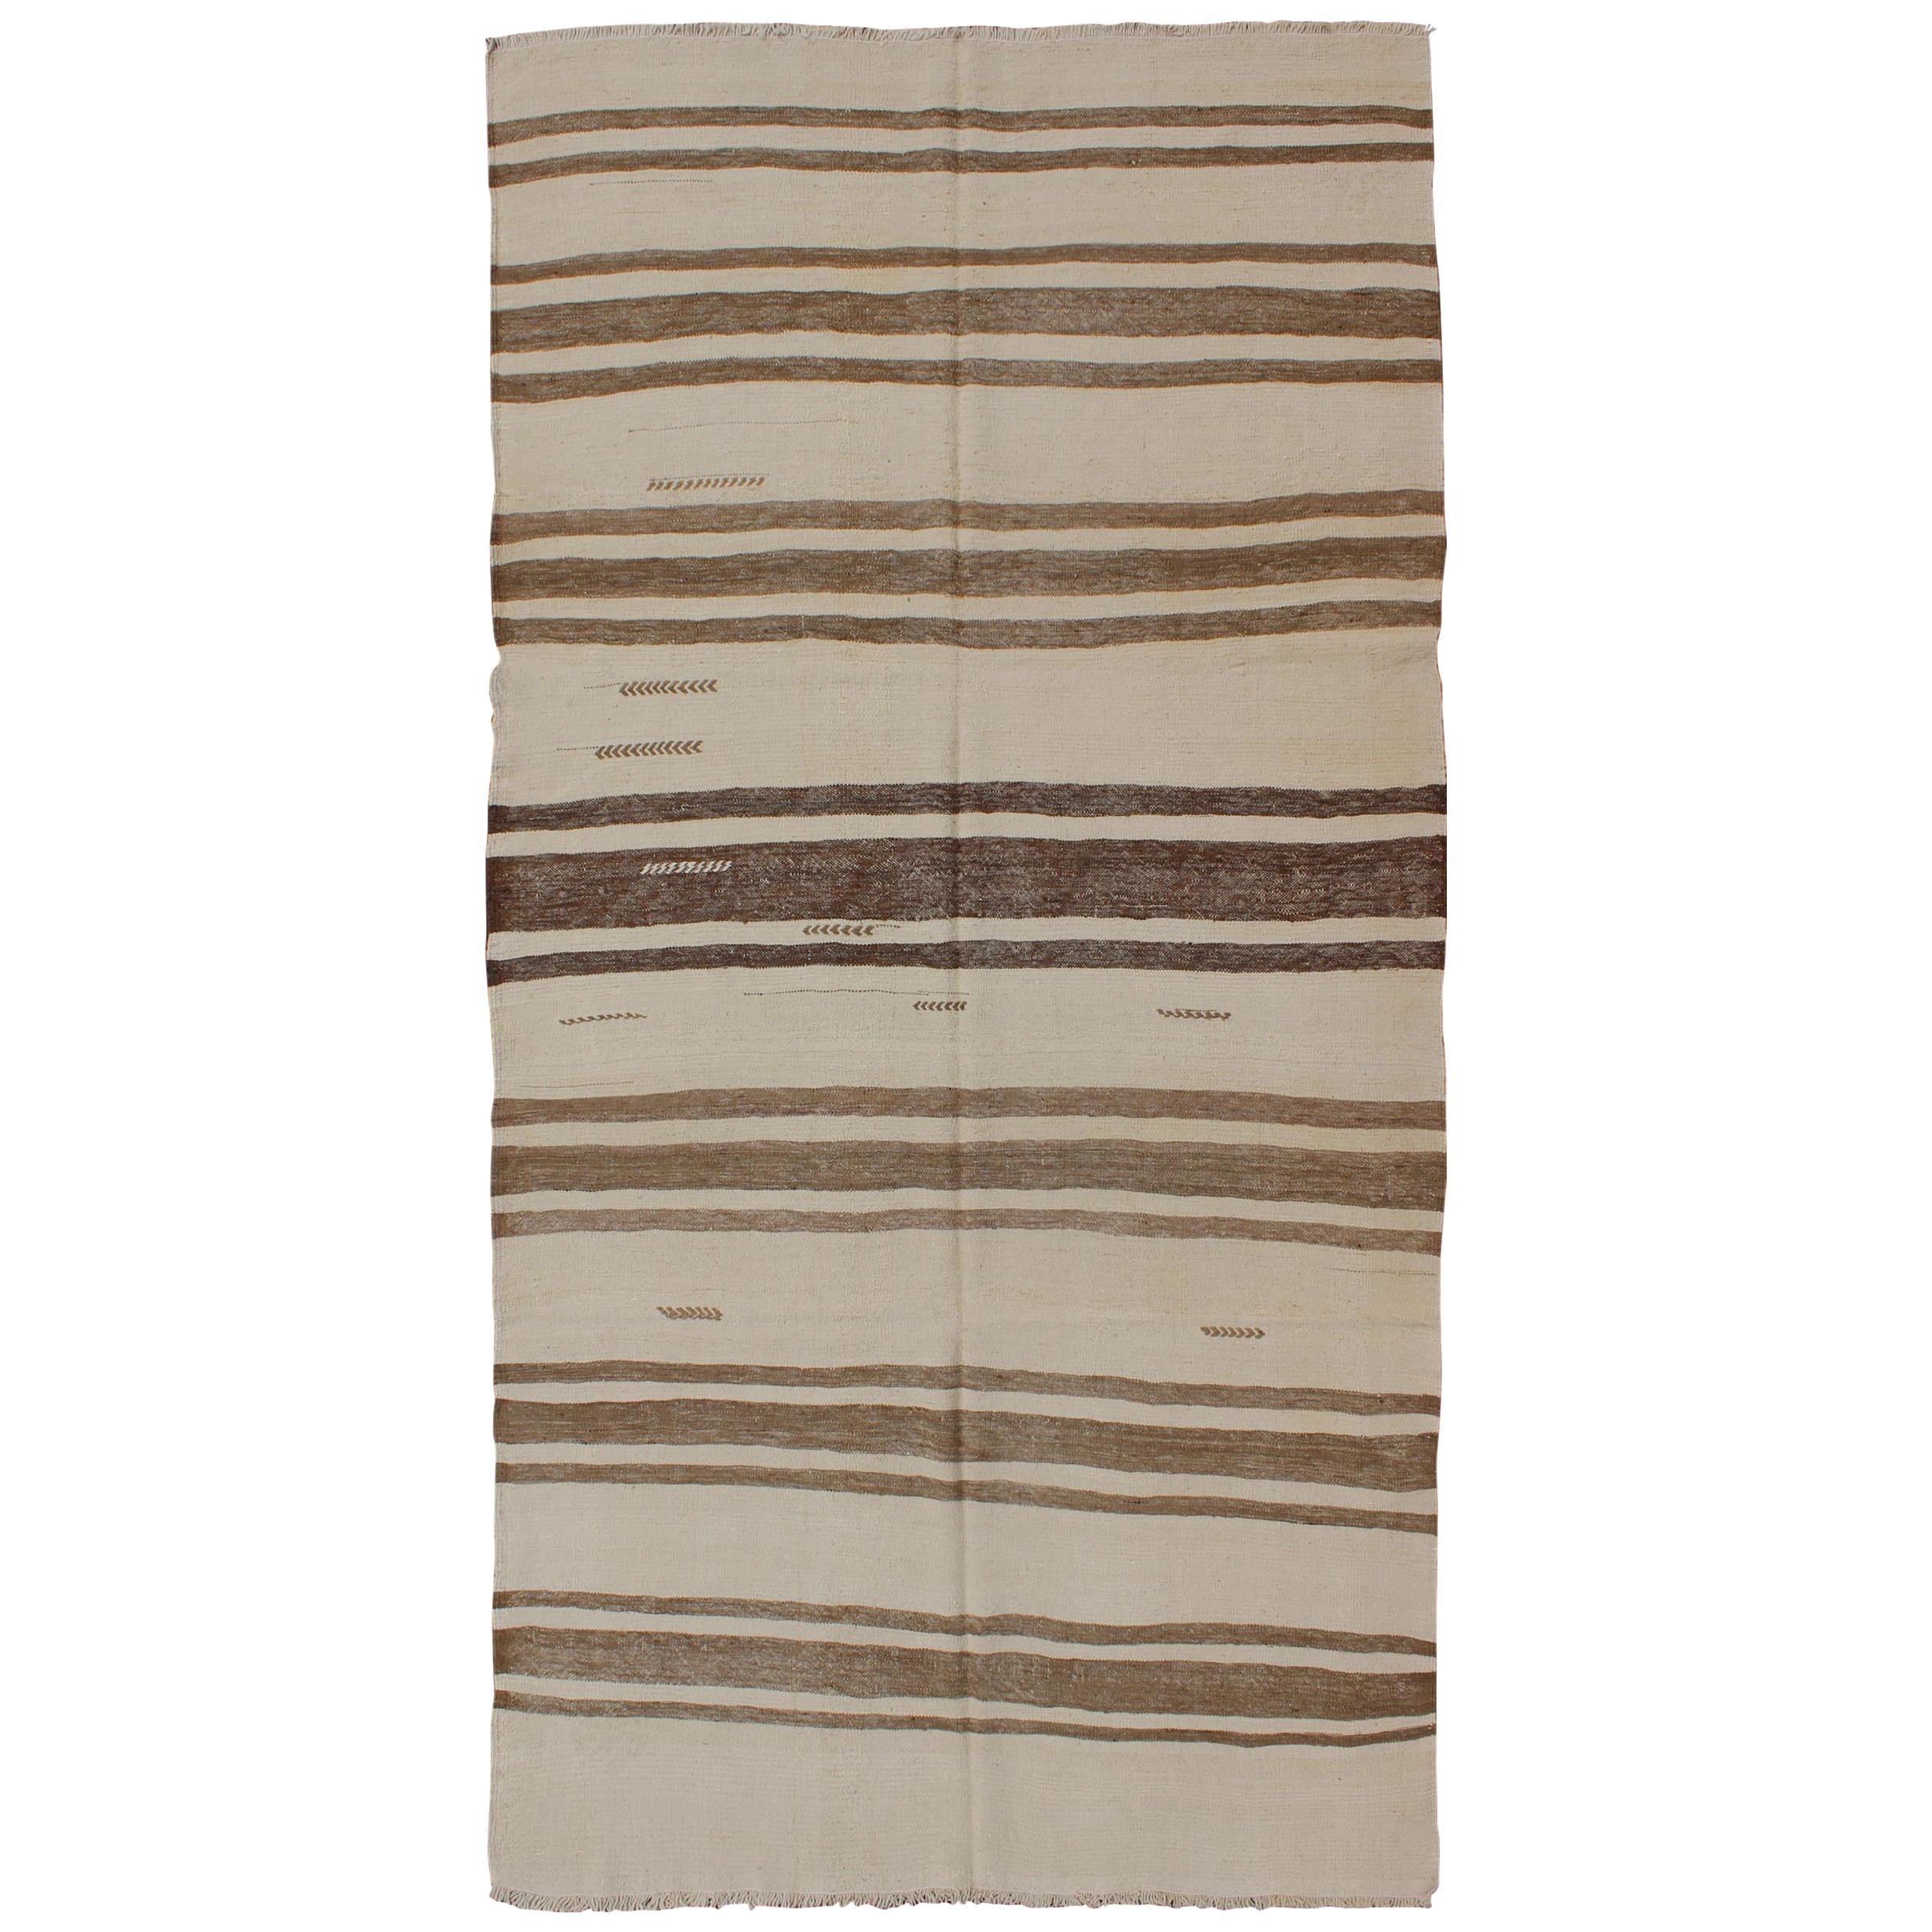 Turkish Vintage Kilim Flat-Weave Rug in Brown and Cream with Stripe Design For Sale